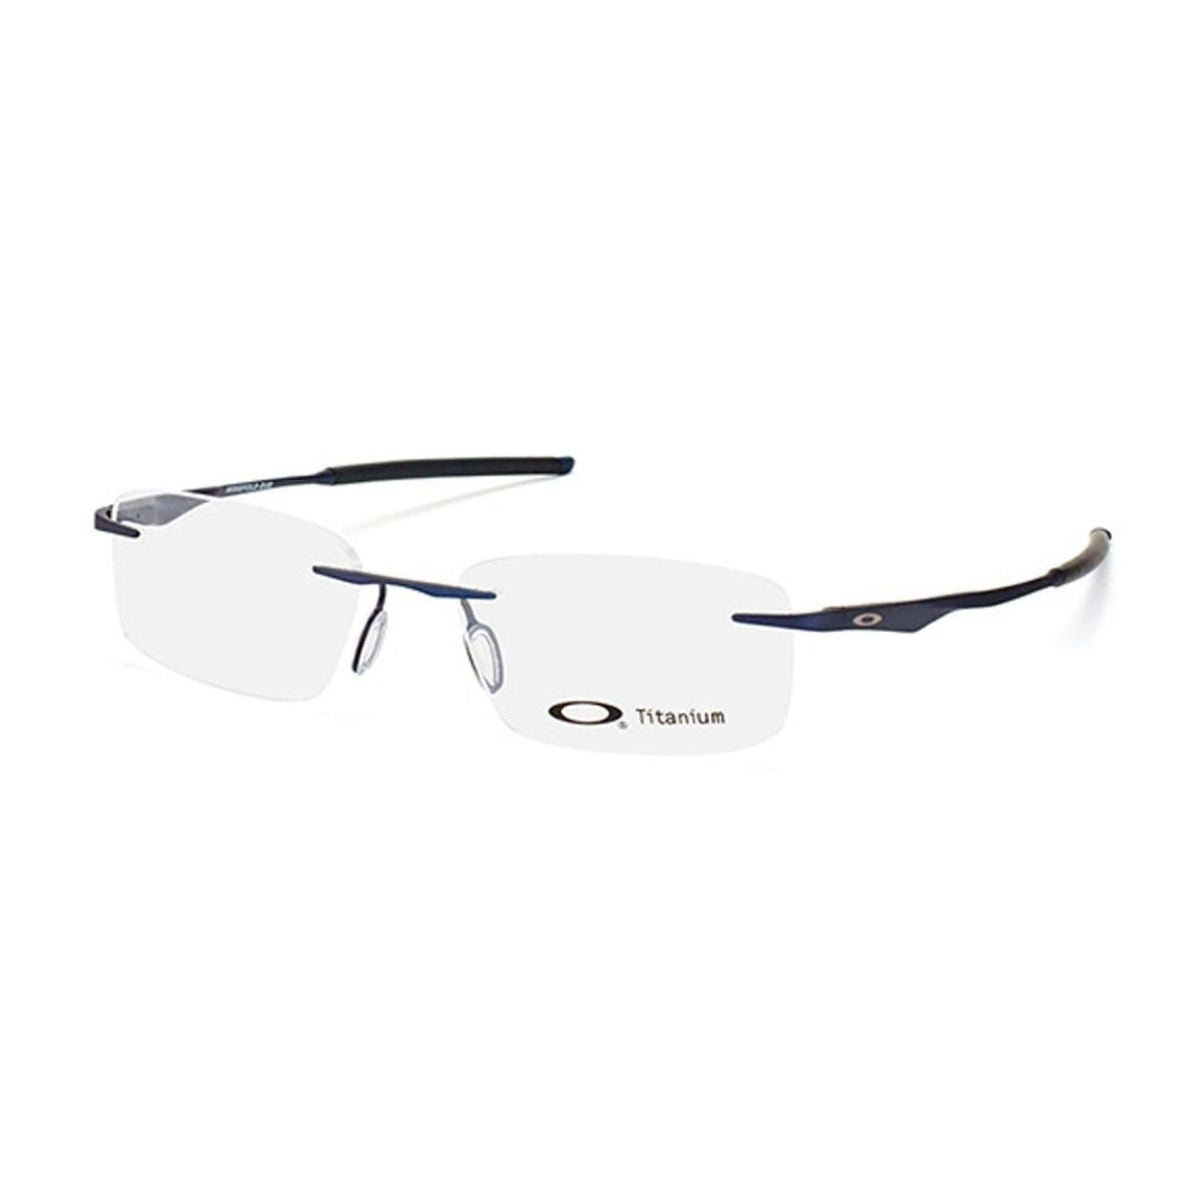 "Oakley 5118 0453 latest frames of spectacles for men's at optorium"